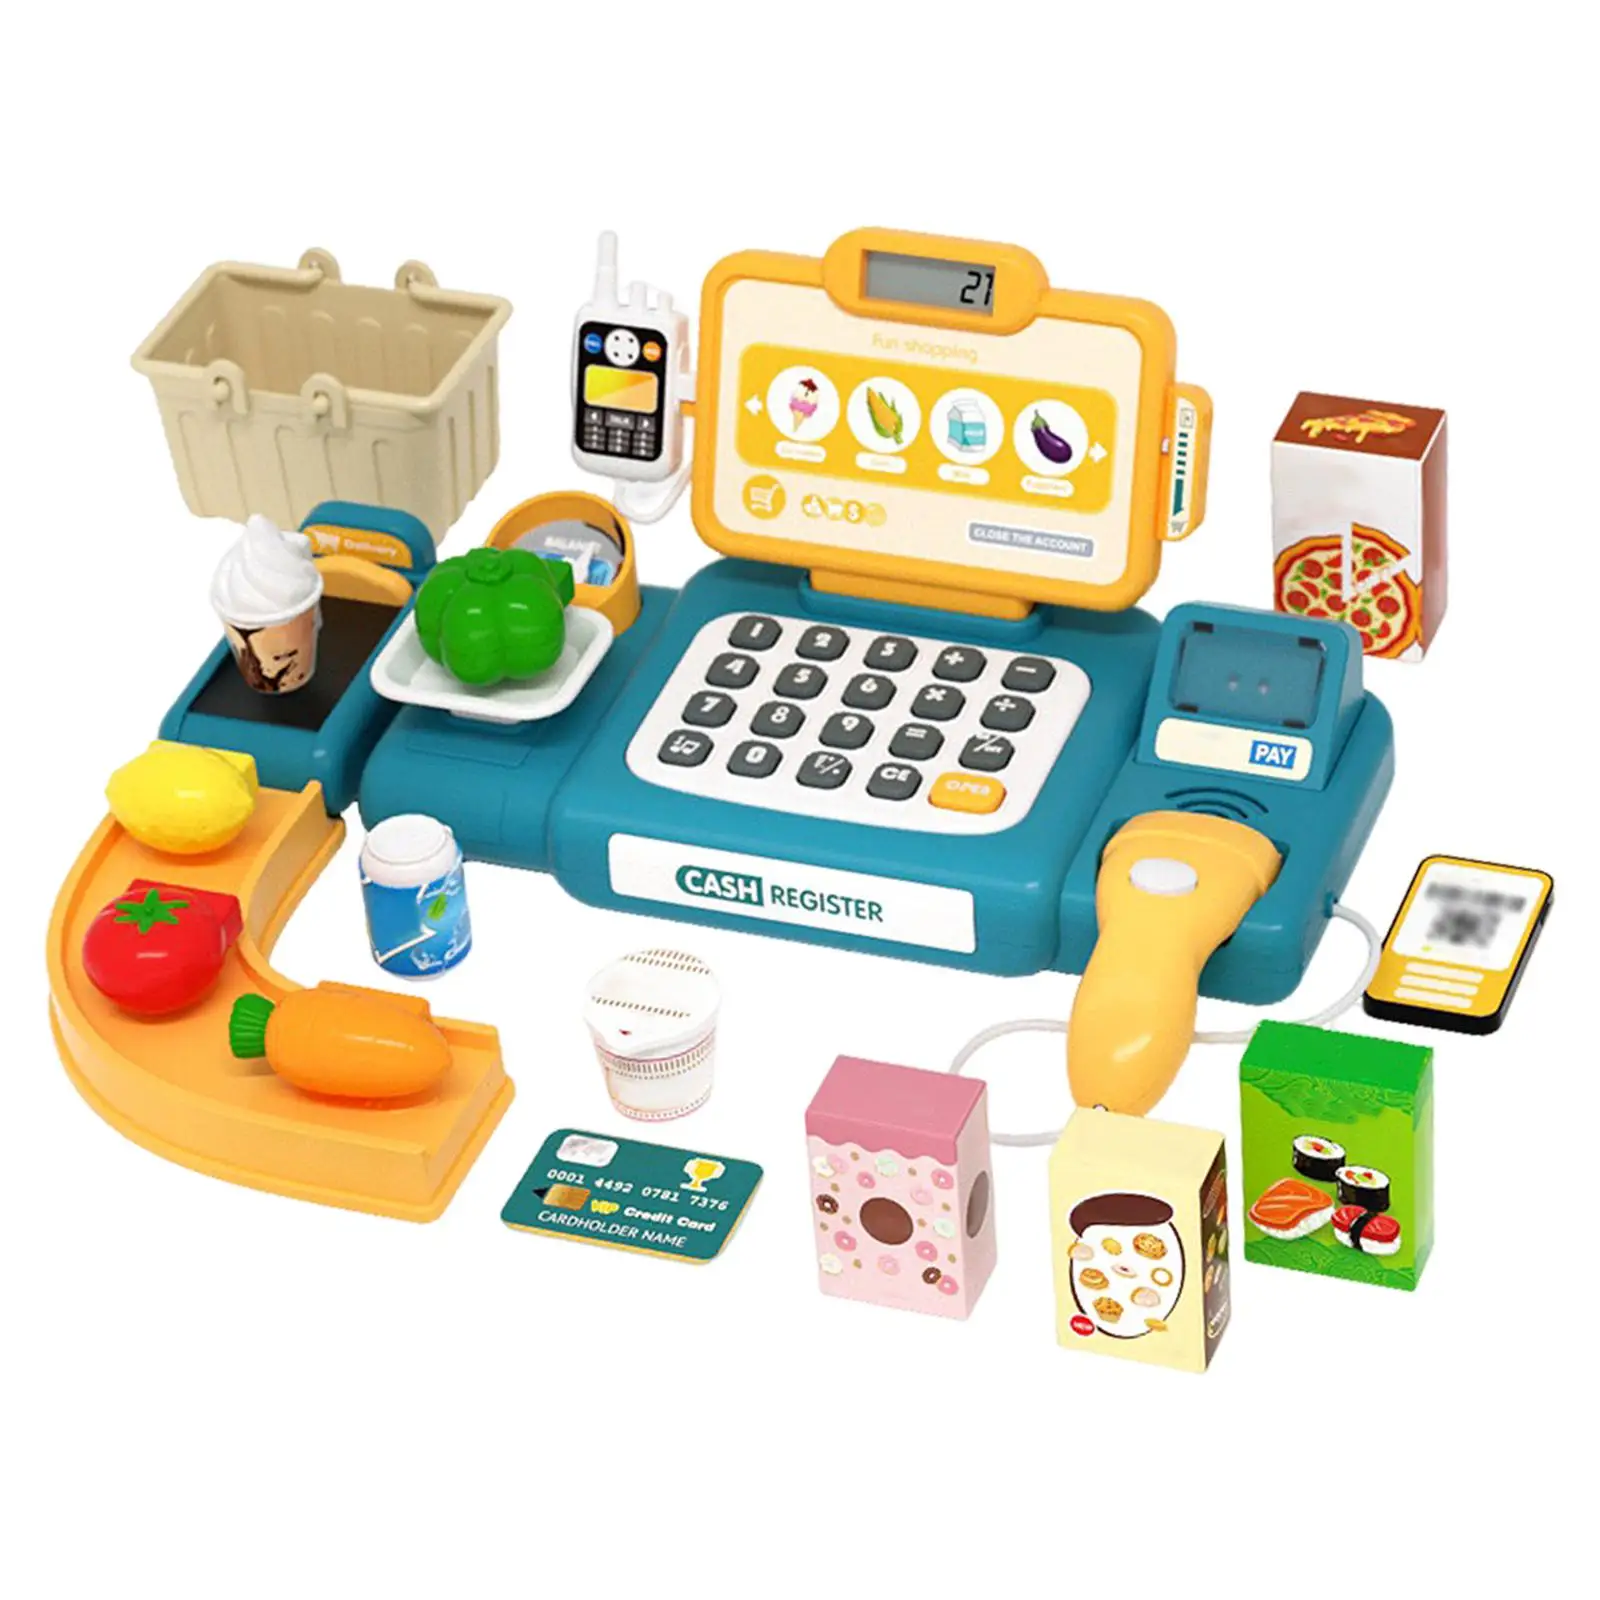 Supermarket Cashier Toy Imaginative Grocery Supermarket Playset for Role Play Activity Preschool Resource Interaction